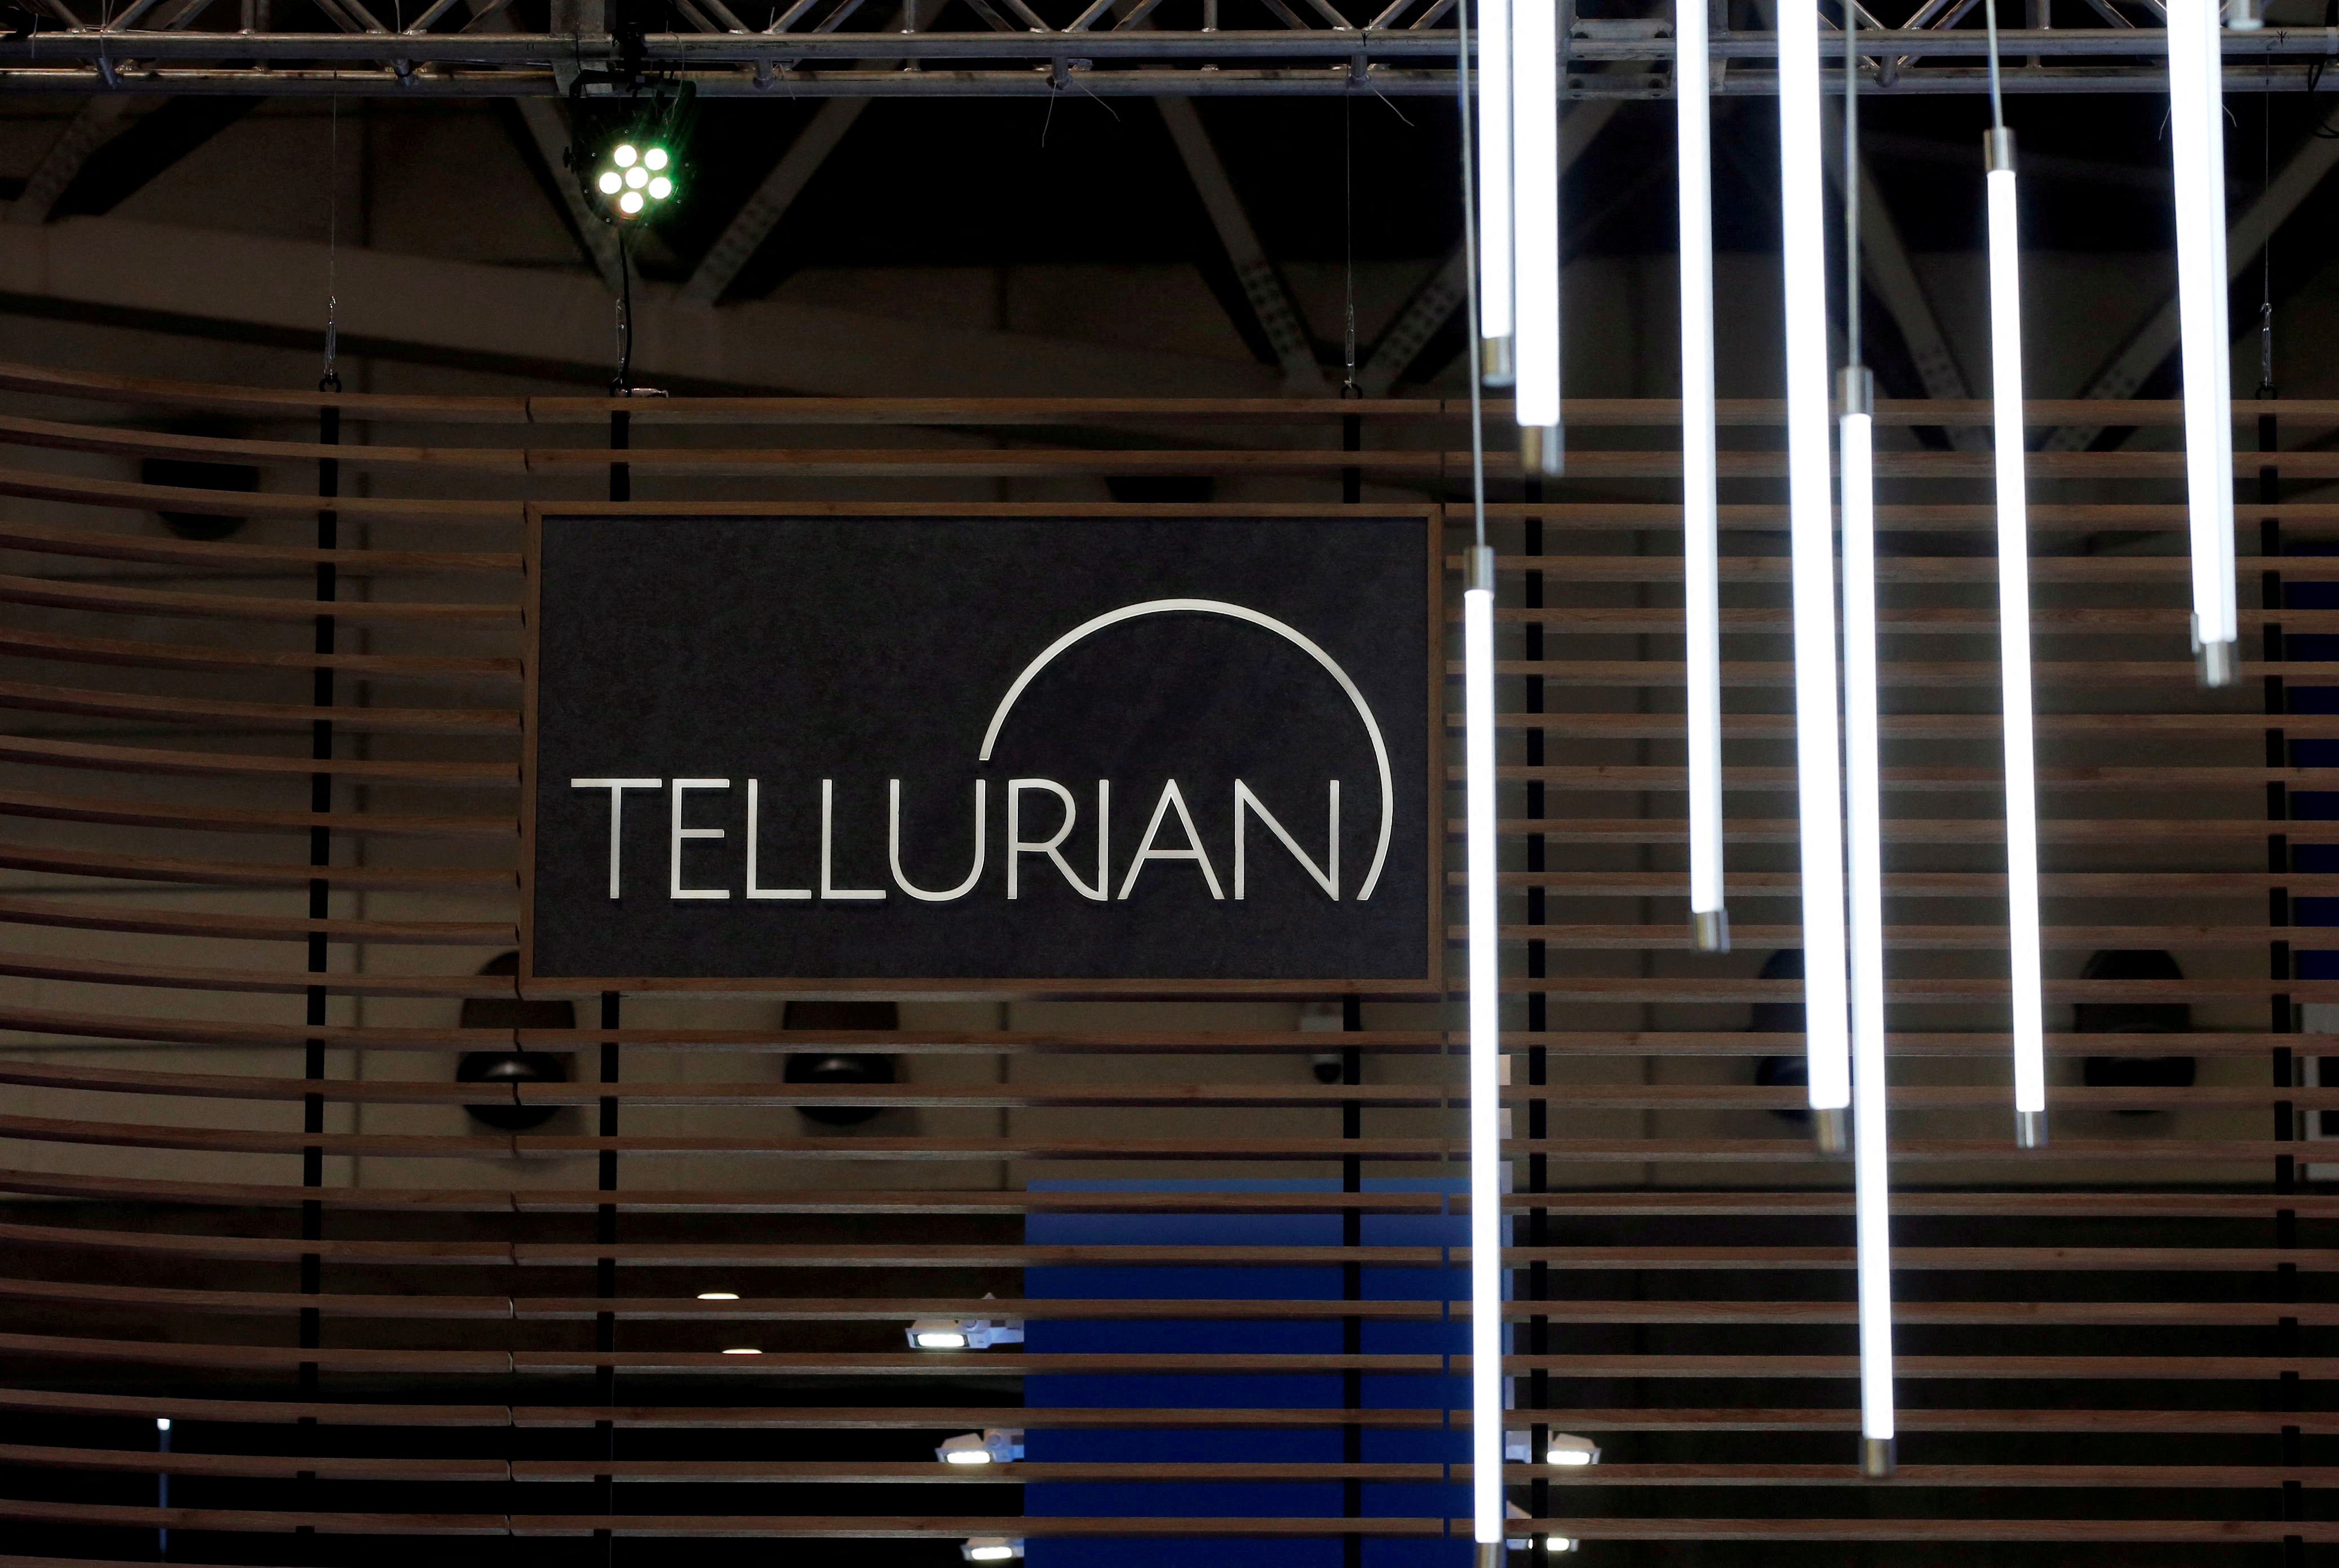 The logo of Tellurian Inc is seen in its booth at Gastech, an expo for the gas industry, in Chiba